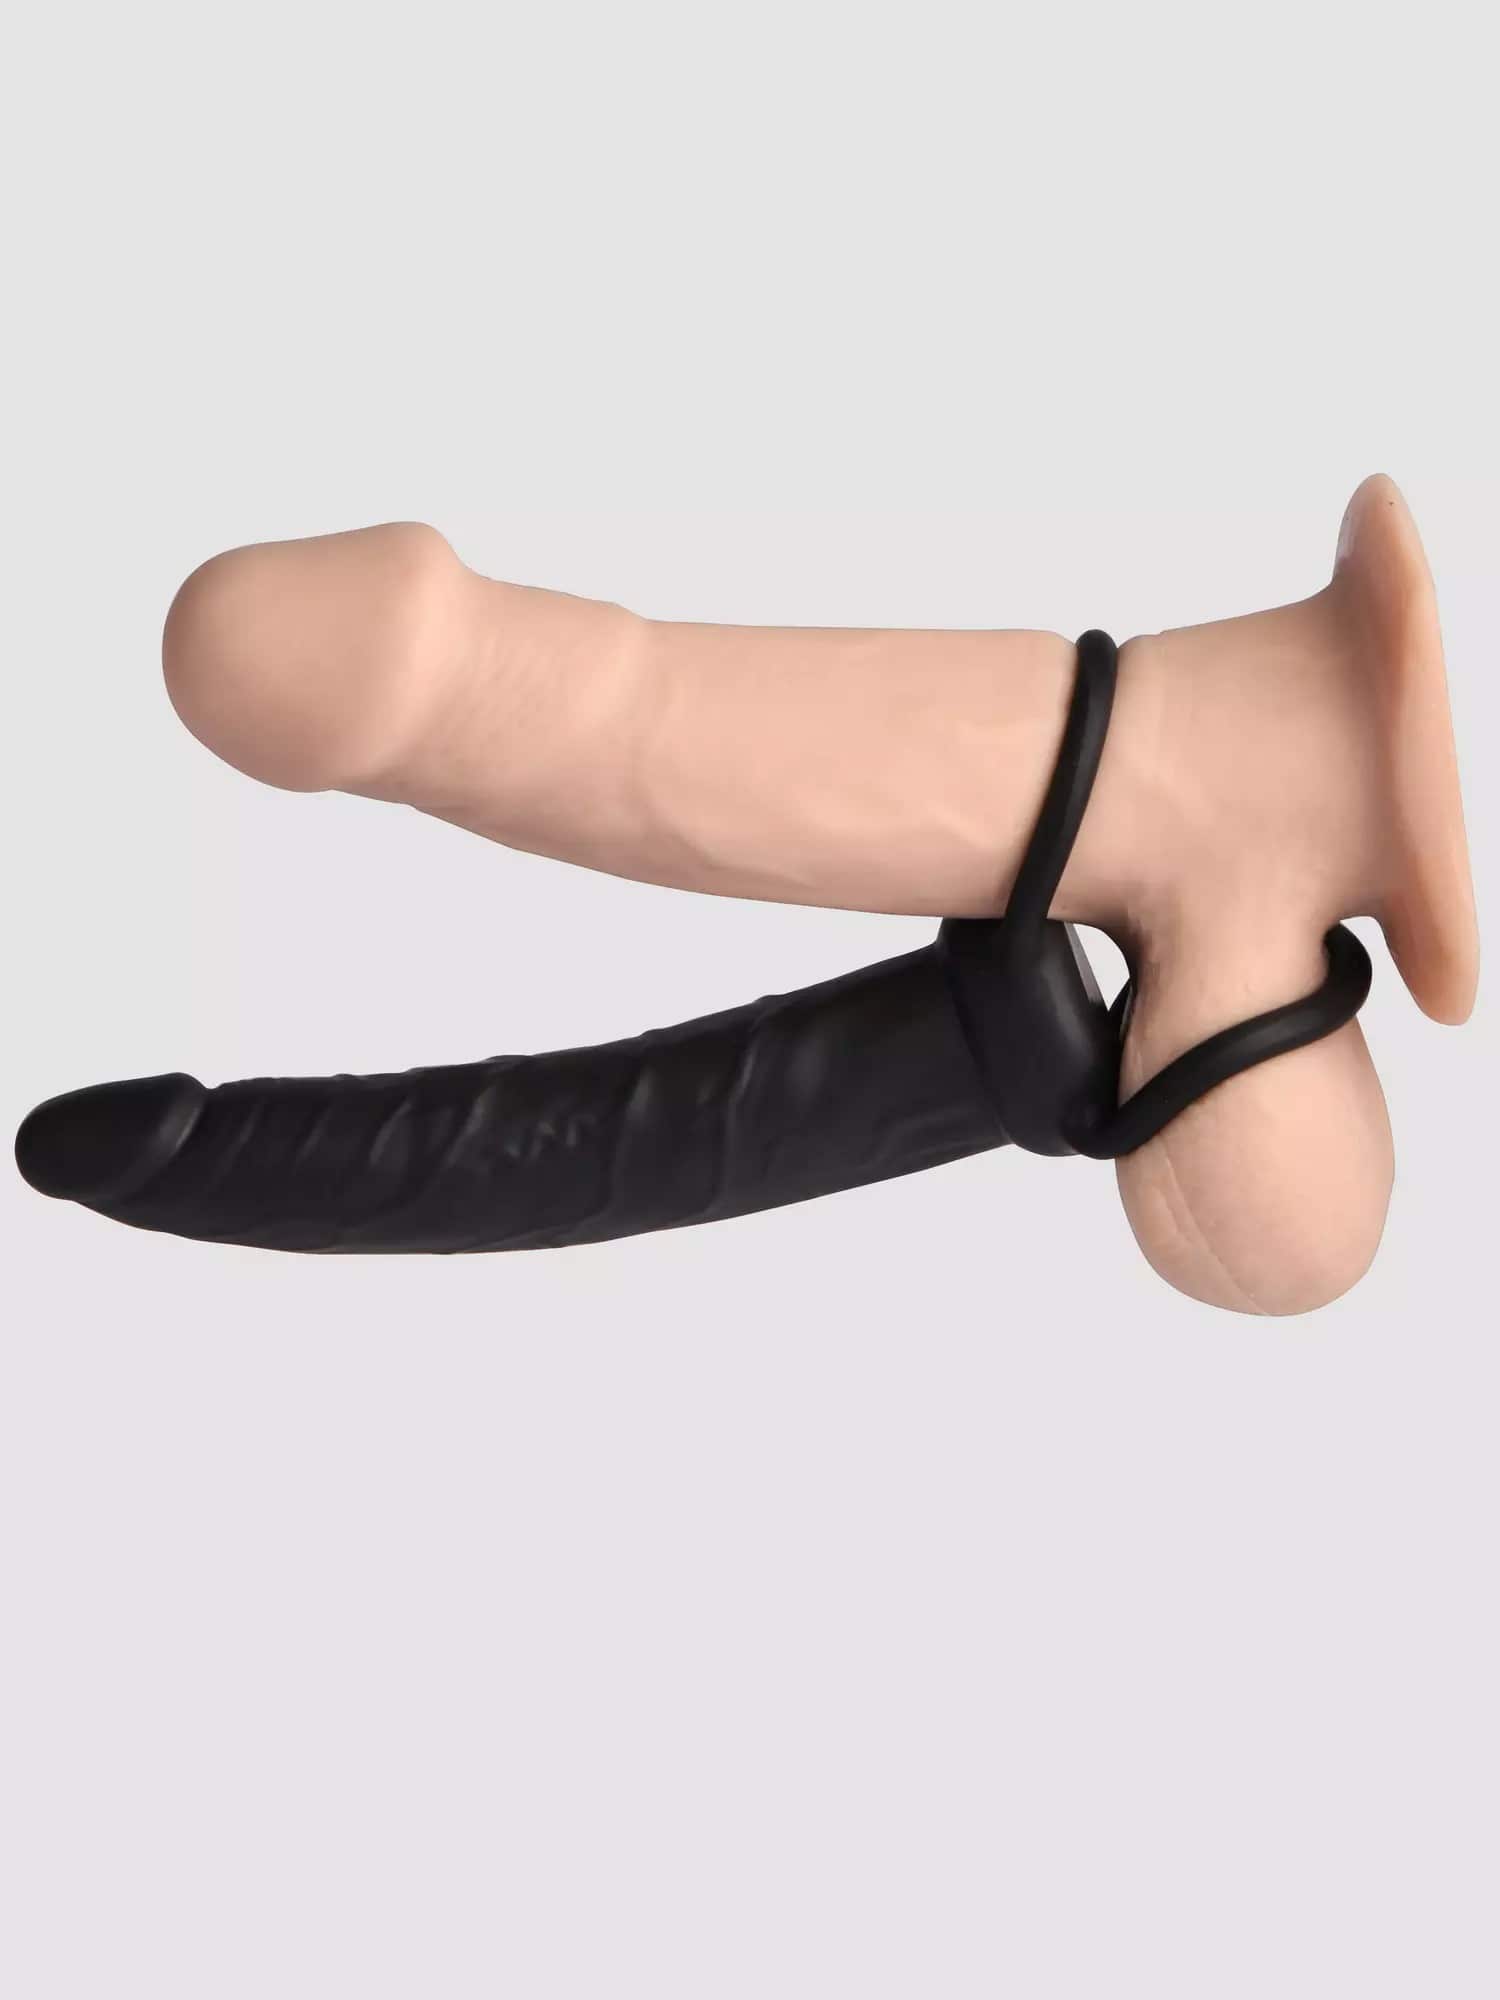 Product Love Rider Double Penetration Strap-On Dildo